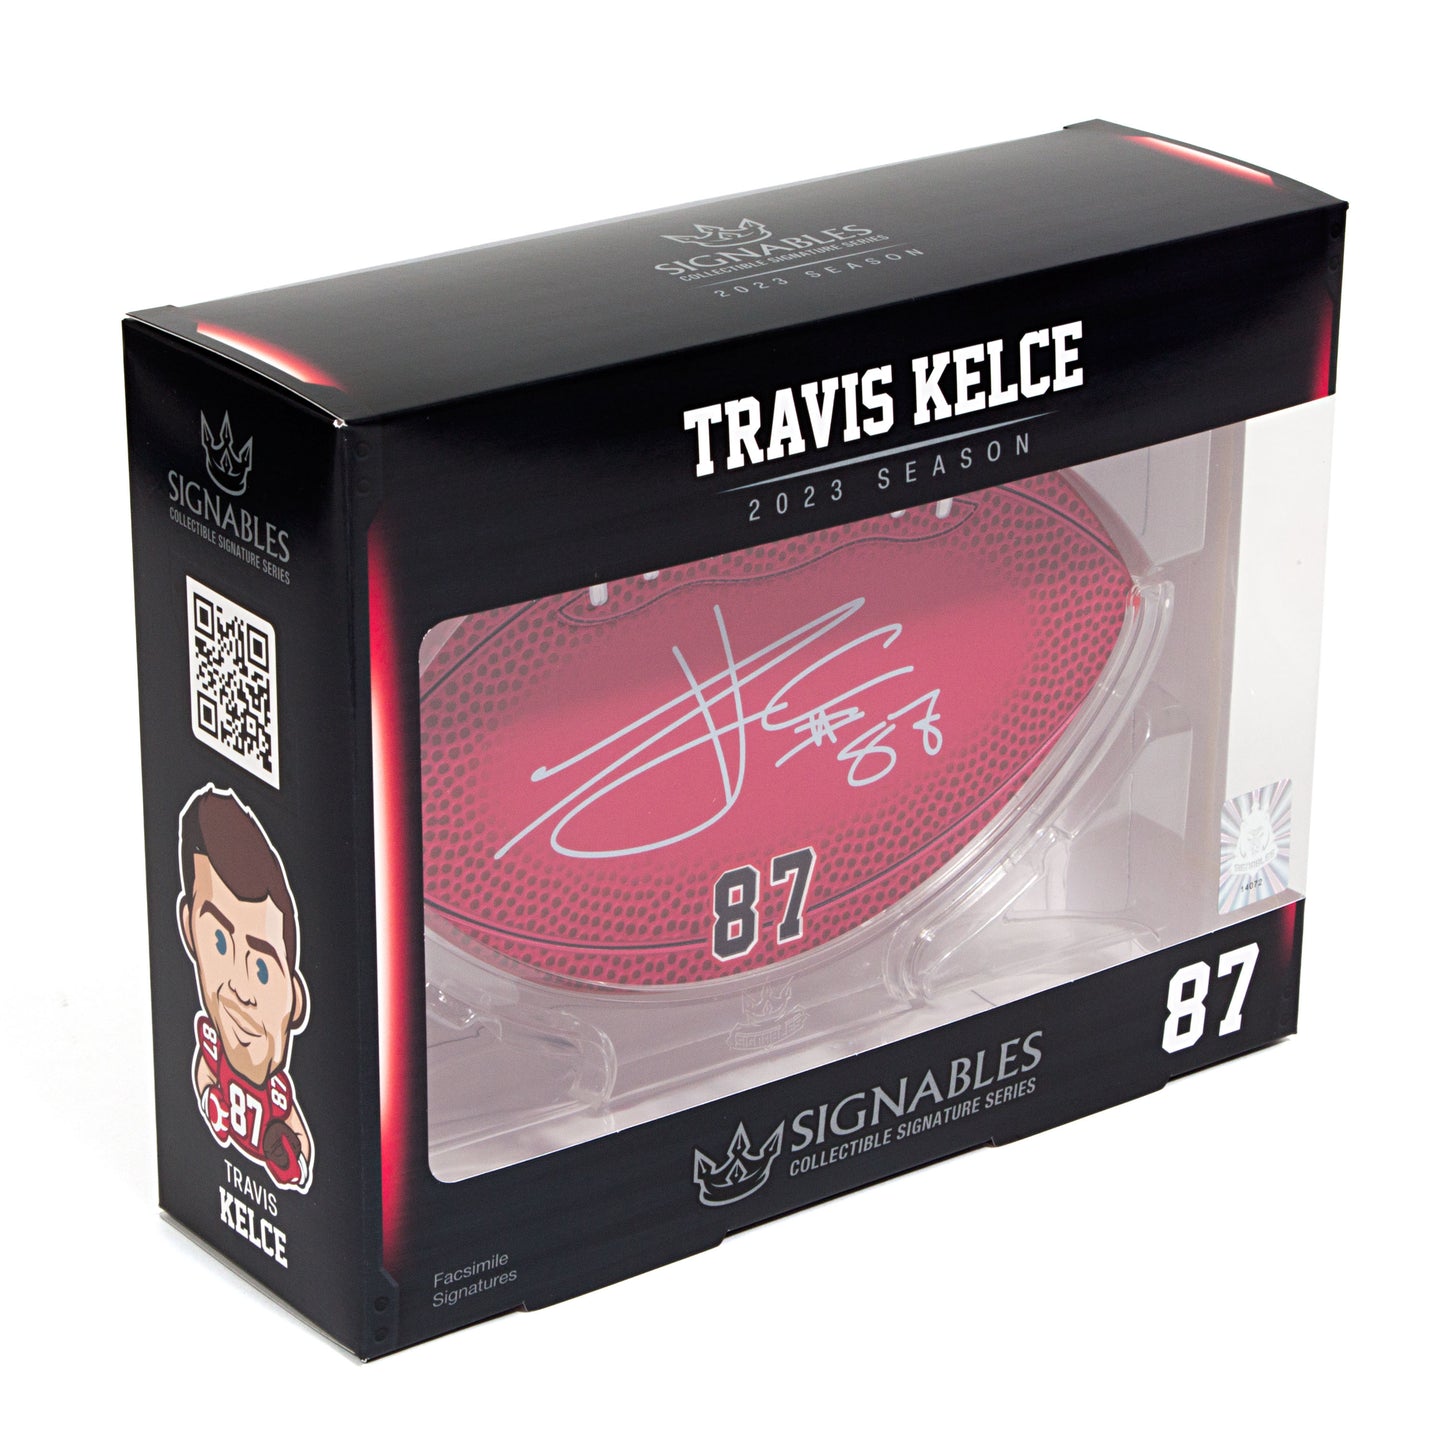 Travis Kelce NFLPA 2023 Sports Collectible Digitally Signed